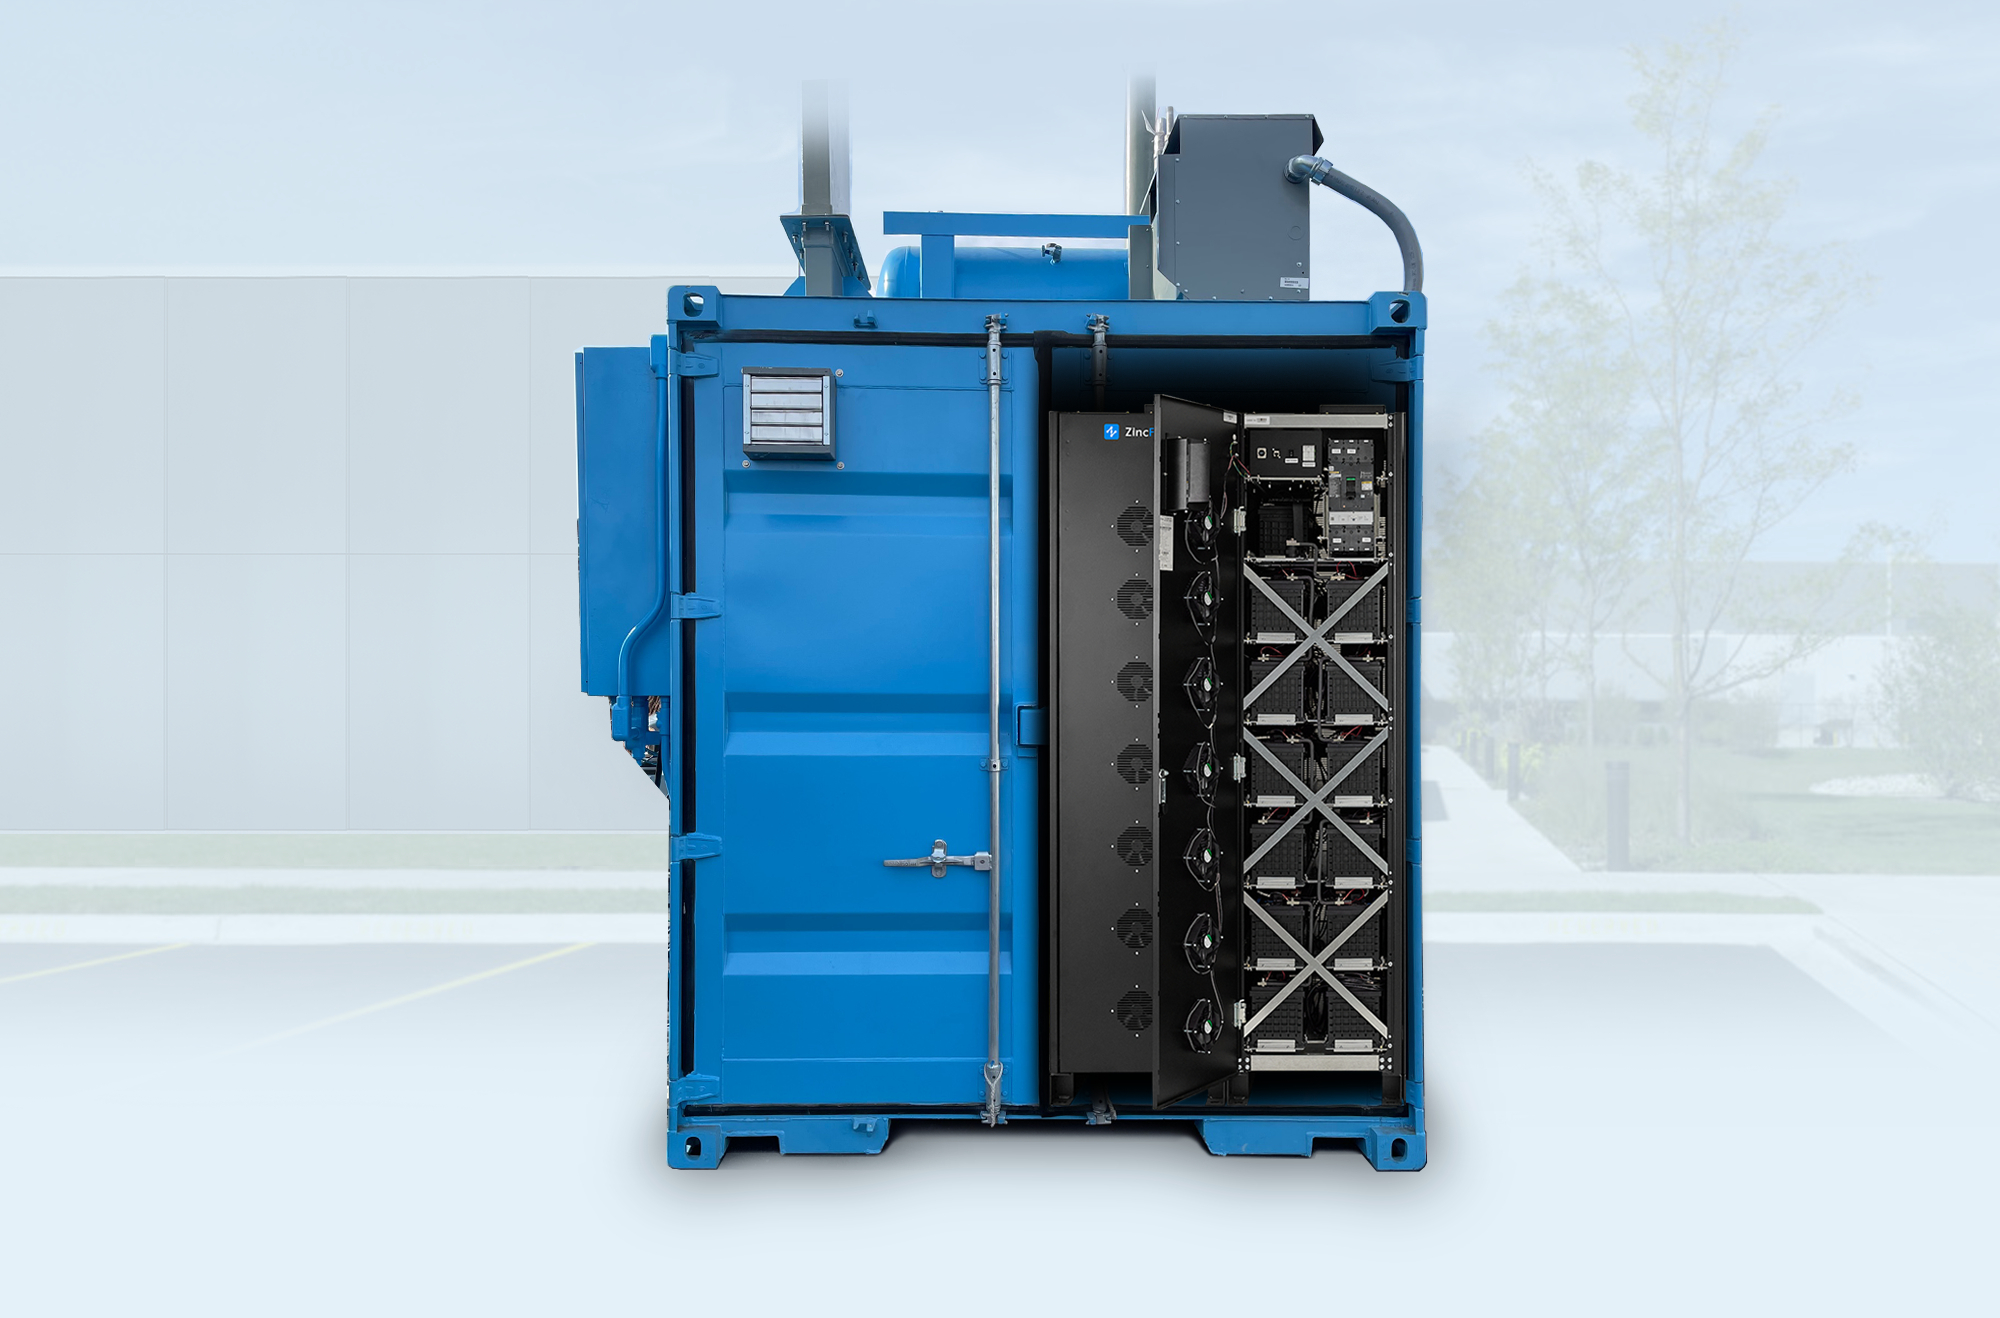 ZincFive’s battery cabinet-based building block uniquely offers immediate high-power performance of up to 10C continuous discharge with no risk of thermal runaway. Photo: Business Wire